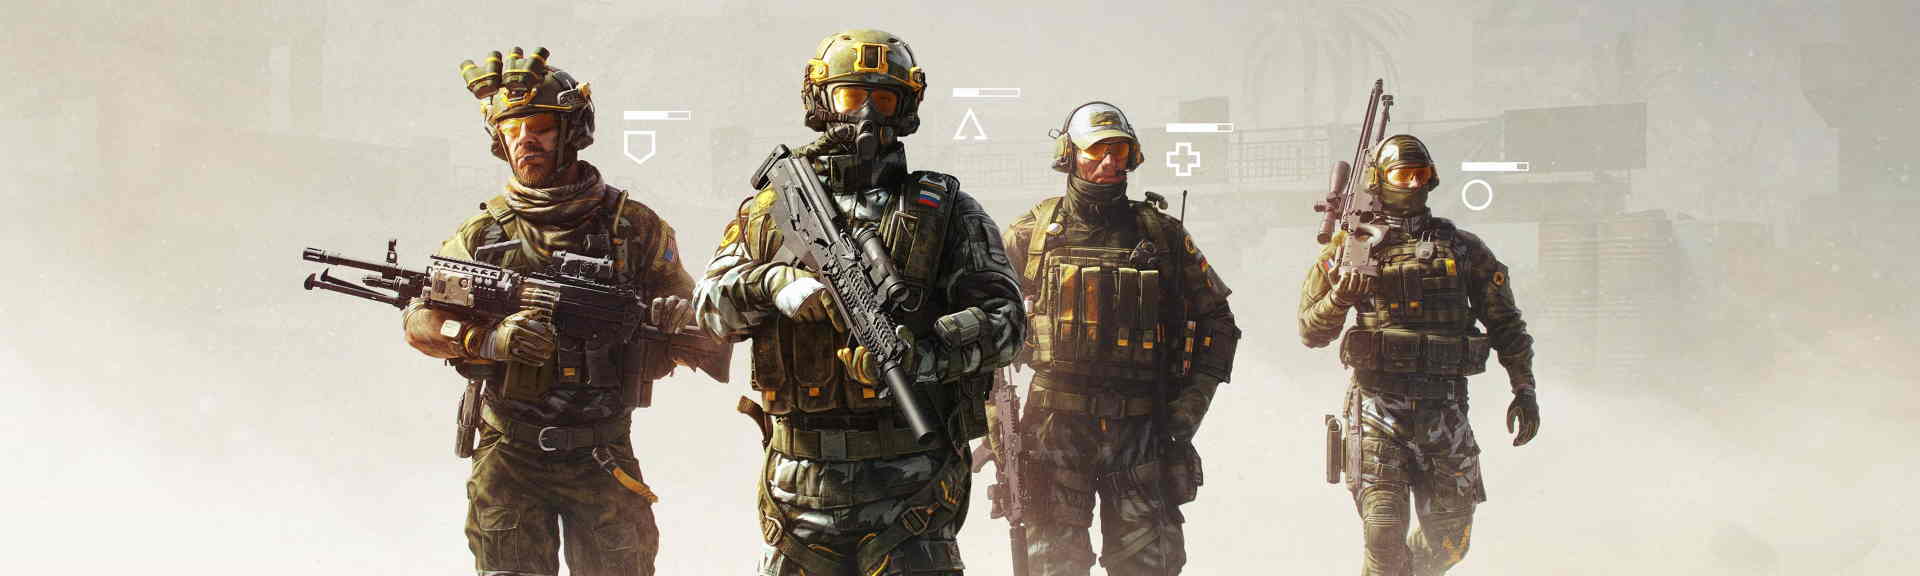 CALIBER game review: the fantasy of being a Special Forces operator fulfilled / Beta version